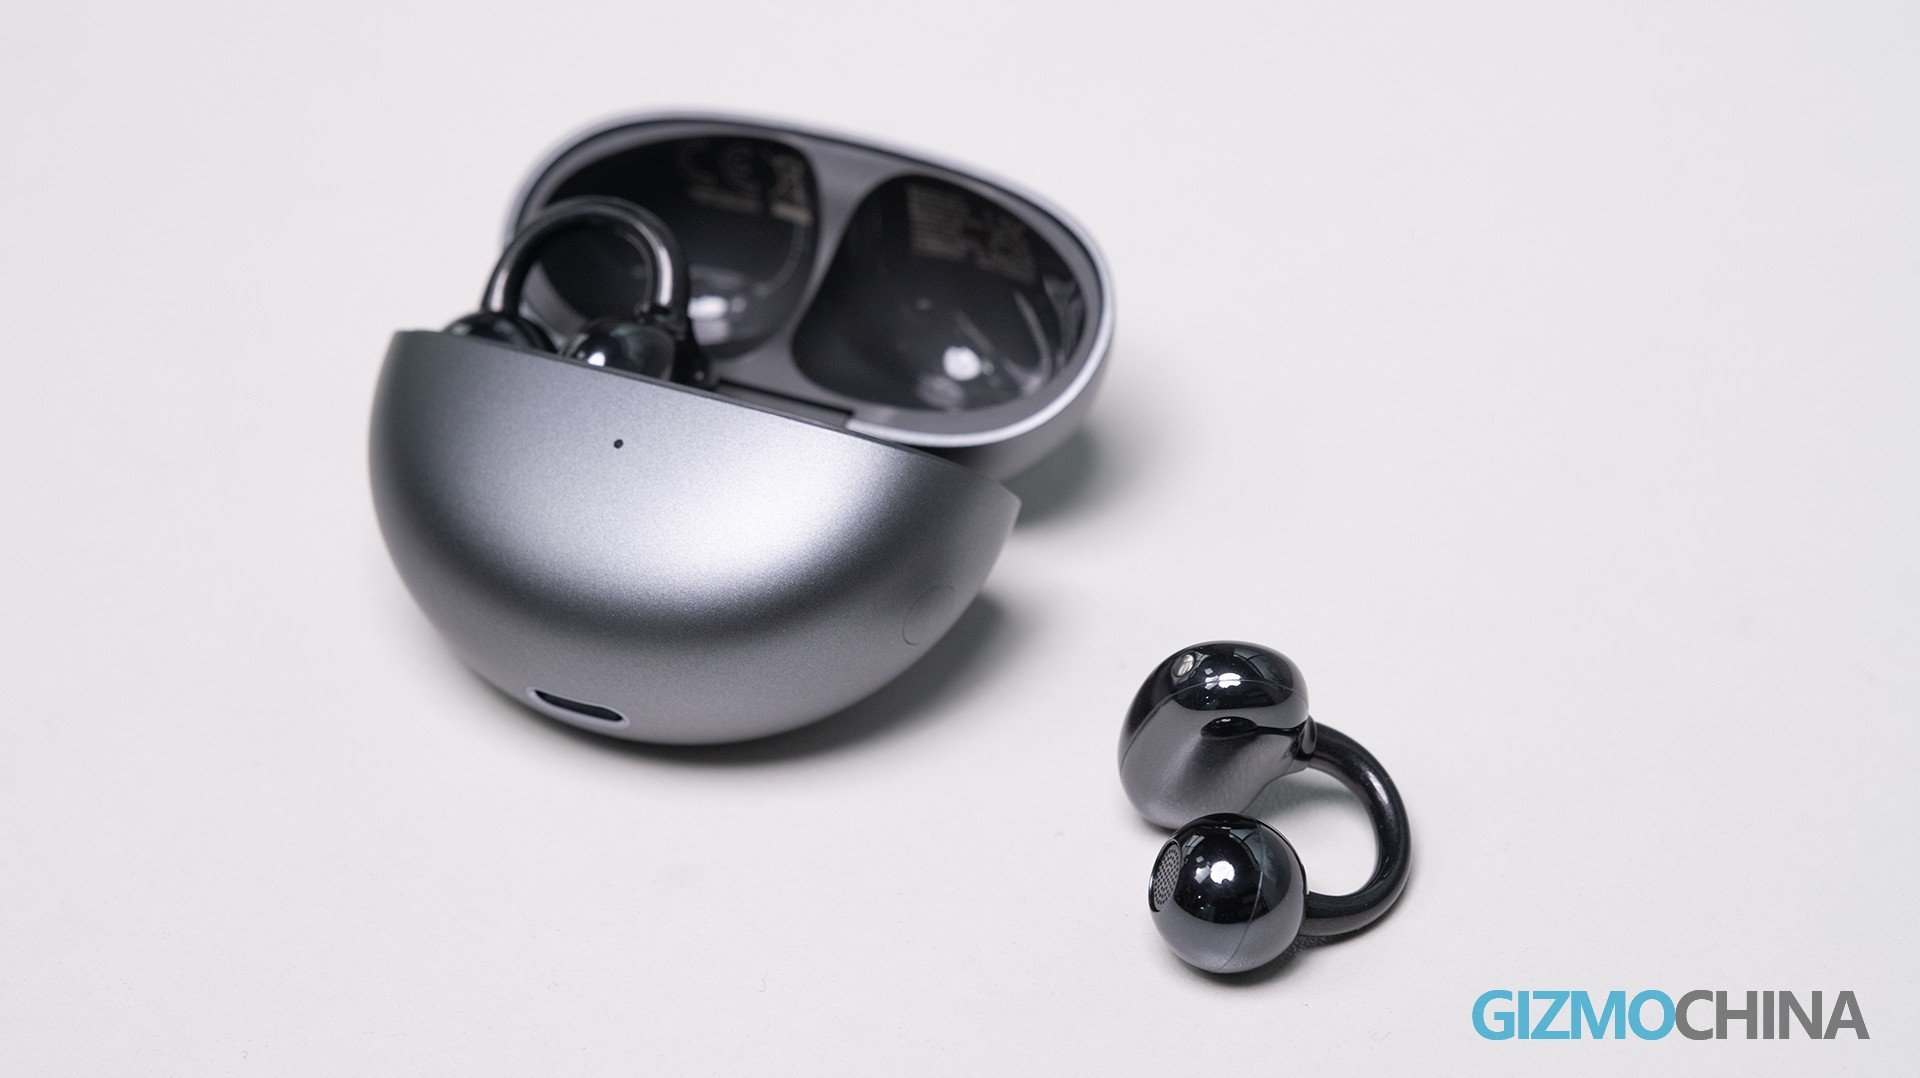 The Huawei FreeClip have an unusual, innovative open ear earbuds design –  but is it genius or a gimmick?